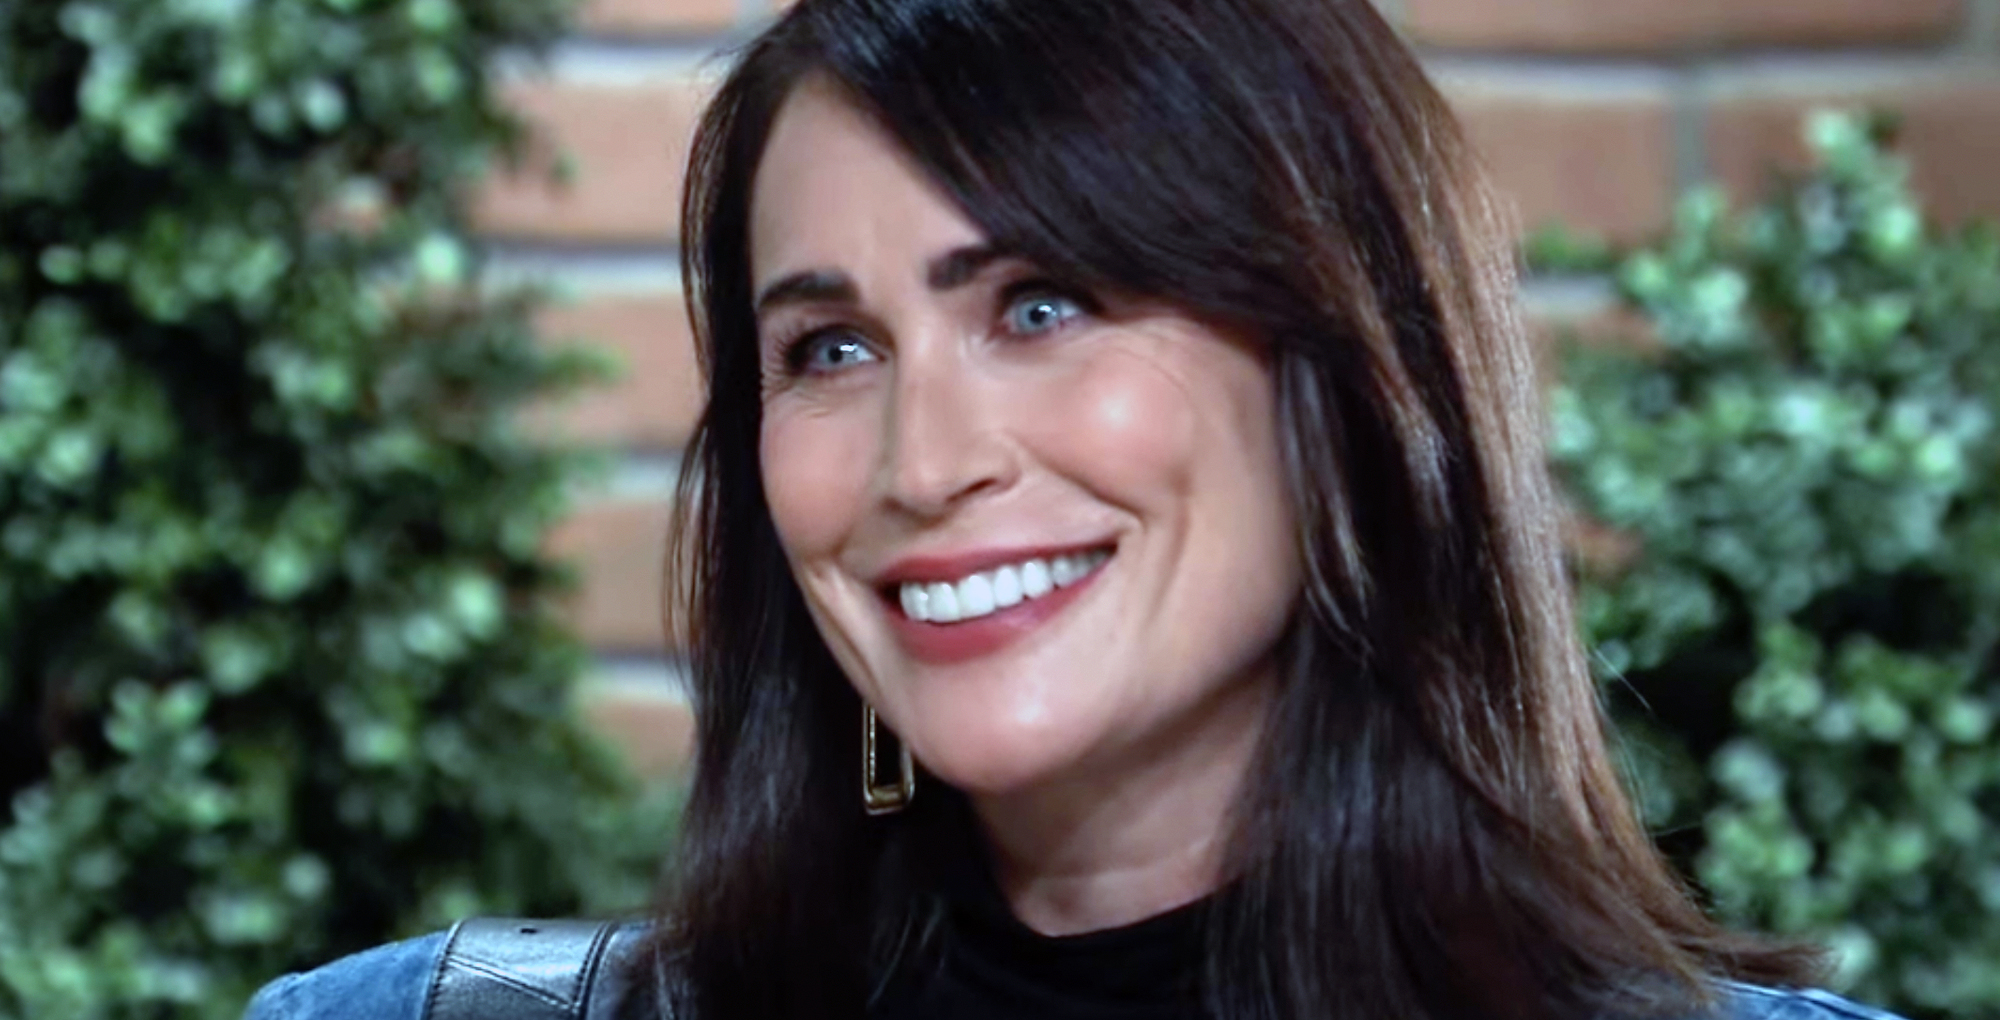 lois cerullo played by rena sofer on general hospital.